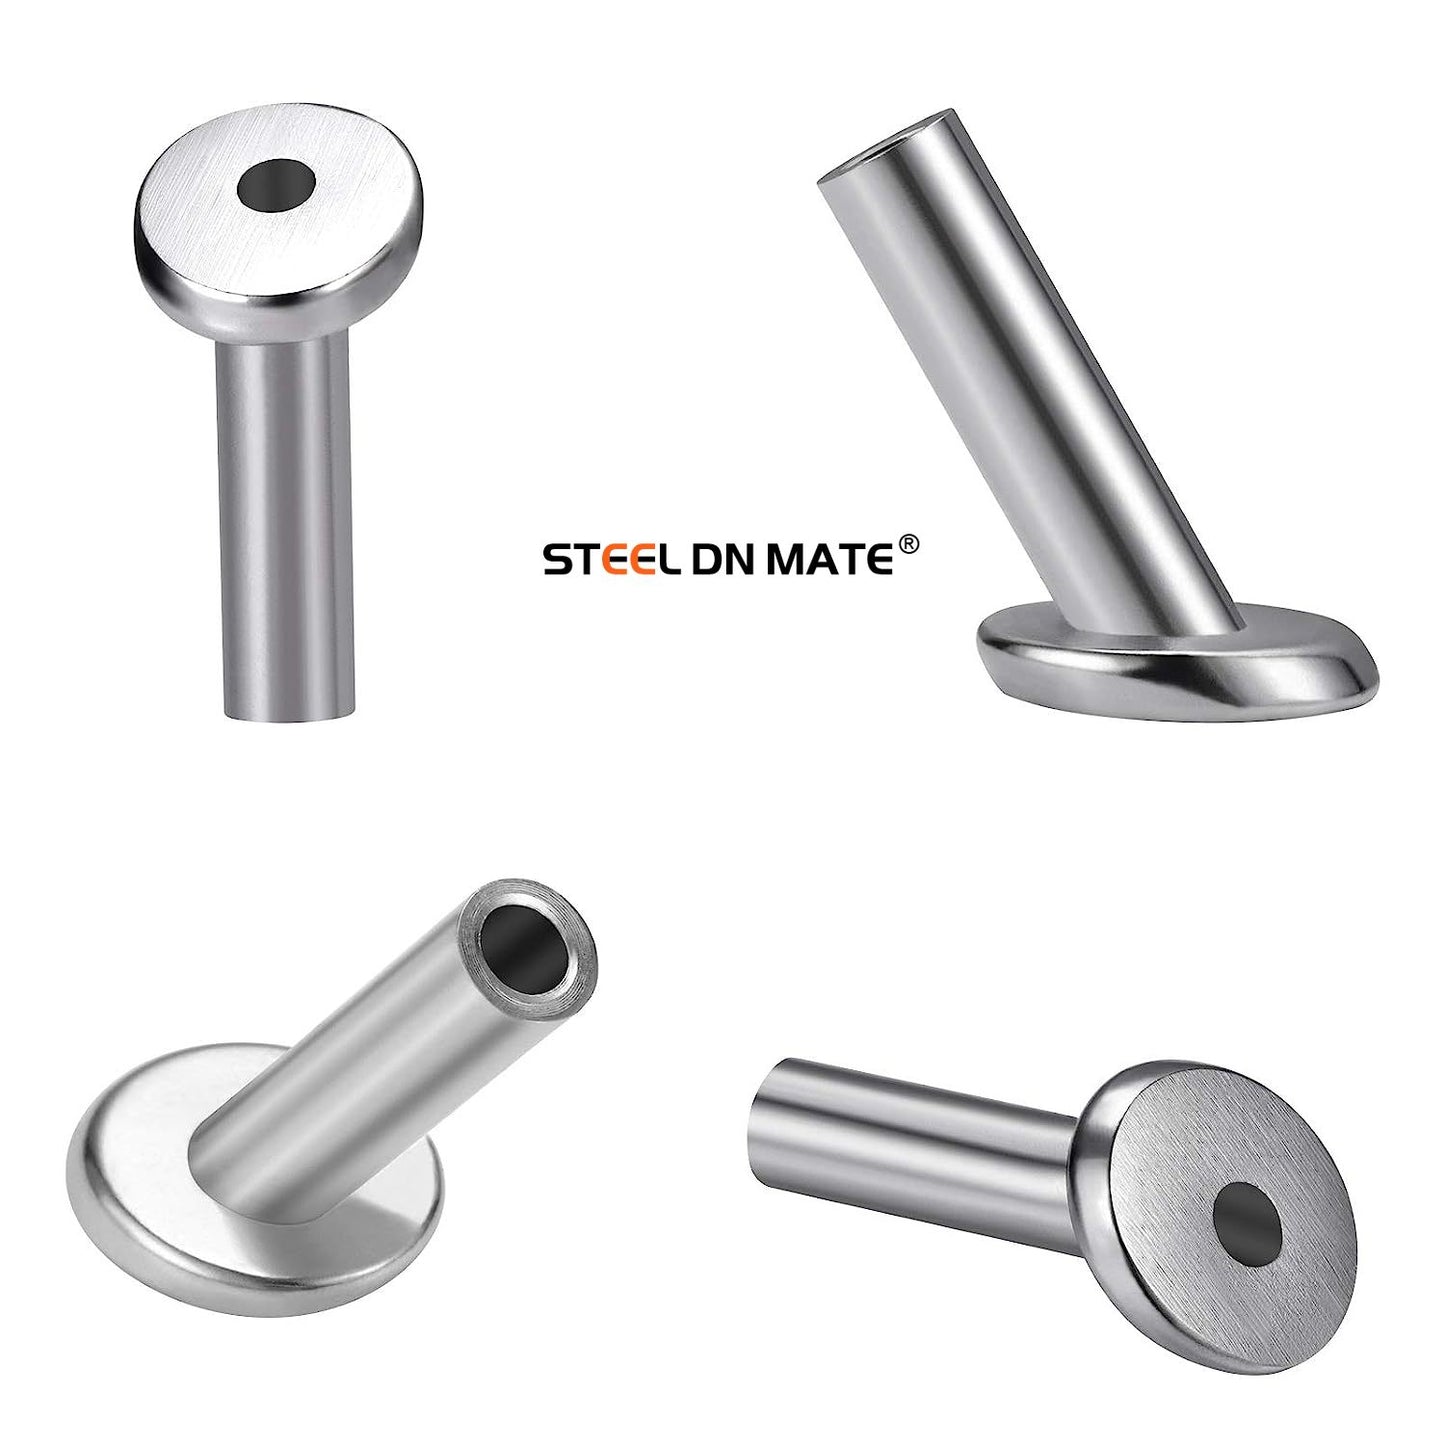 Steel DN Mate 30 Pack T316 Marine Grade Stainless Steel 30 Degree Angle Beveled Protector Sleeves, Wood Post Protector Sleeve for 1/8" Deck Cable Railing kit with a Drill Bit, DIY Balustrade DT03